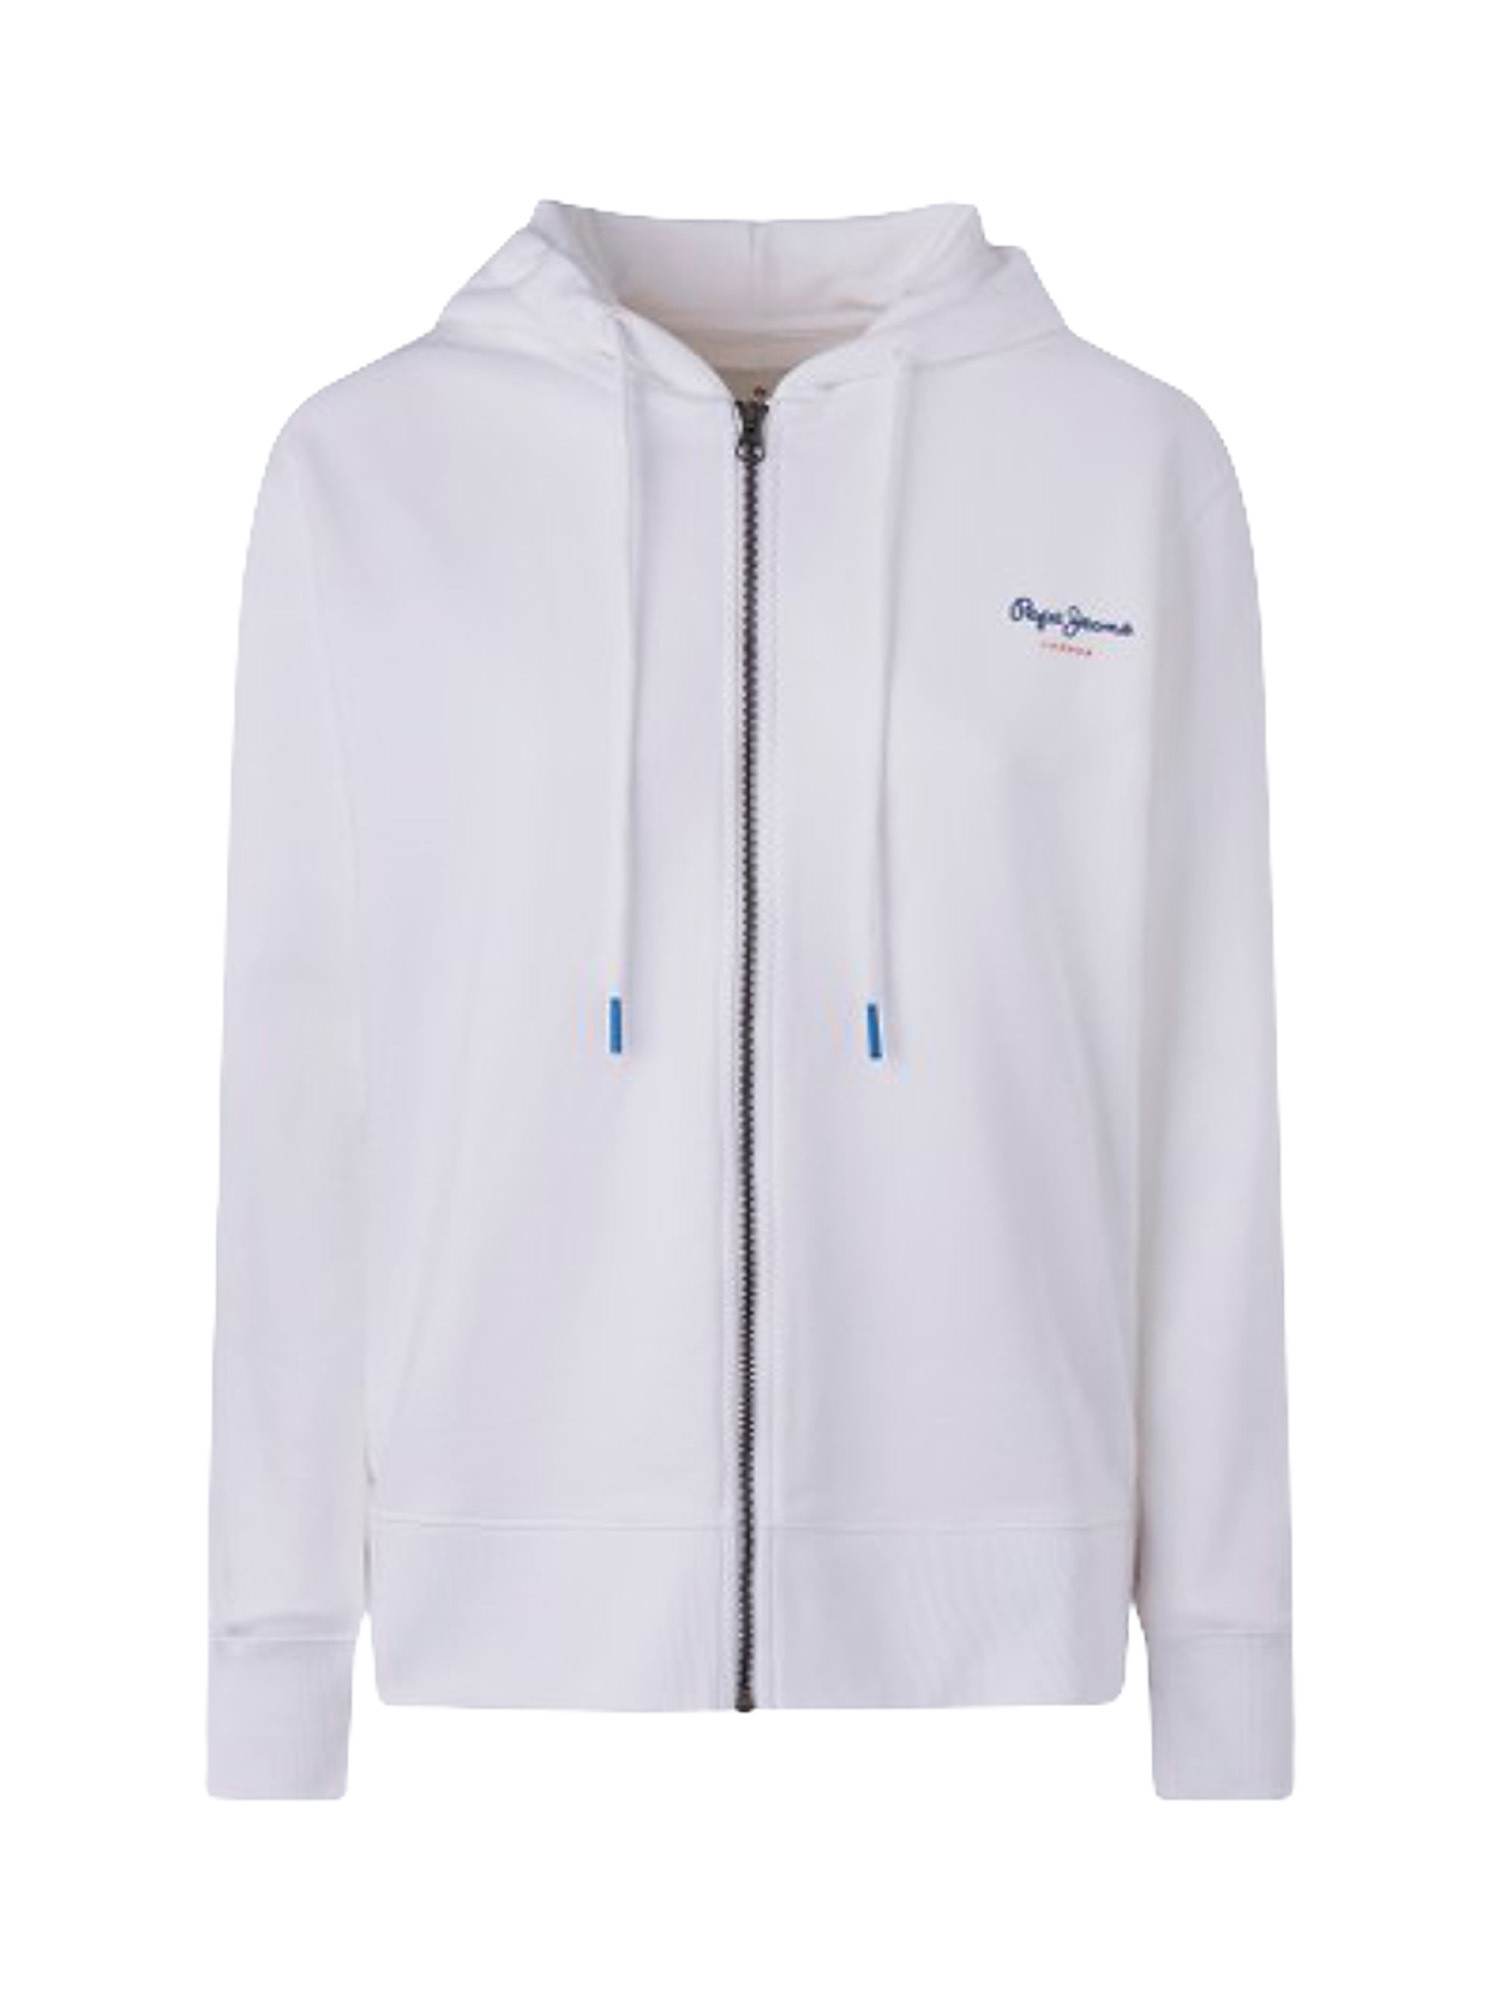 Giacca sportiva calista zipper, Bianco, large image number 0